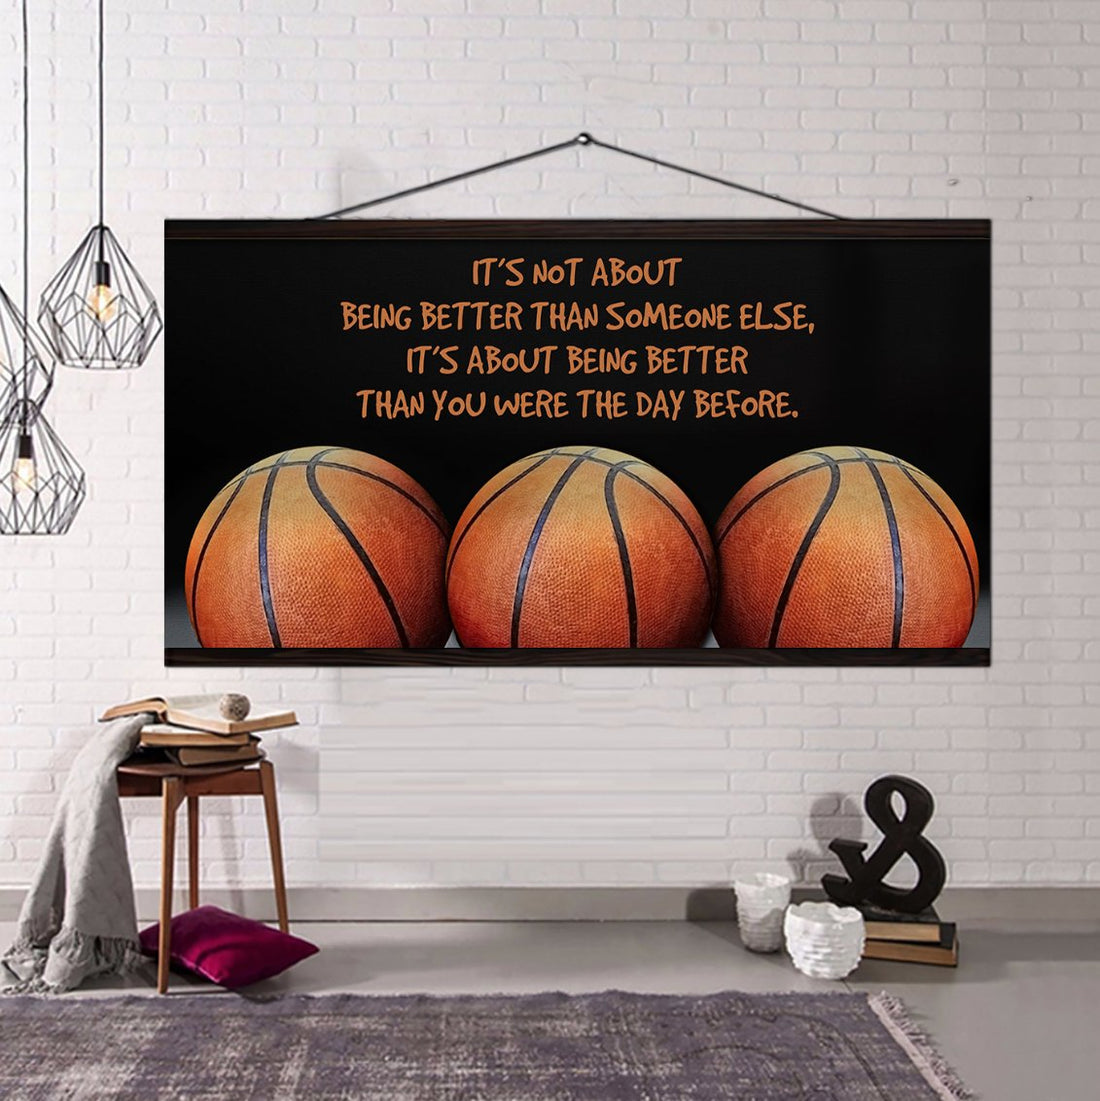 Baketball Ver 5 It is not About Being Better Than Someone Else It is about being better than you were the day before